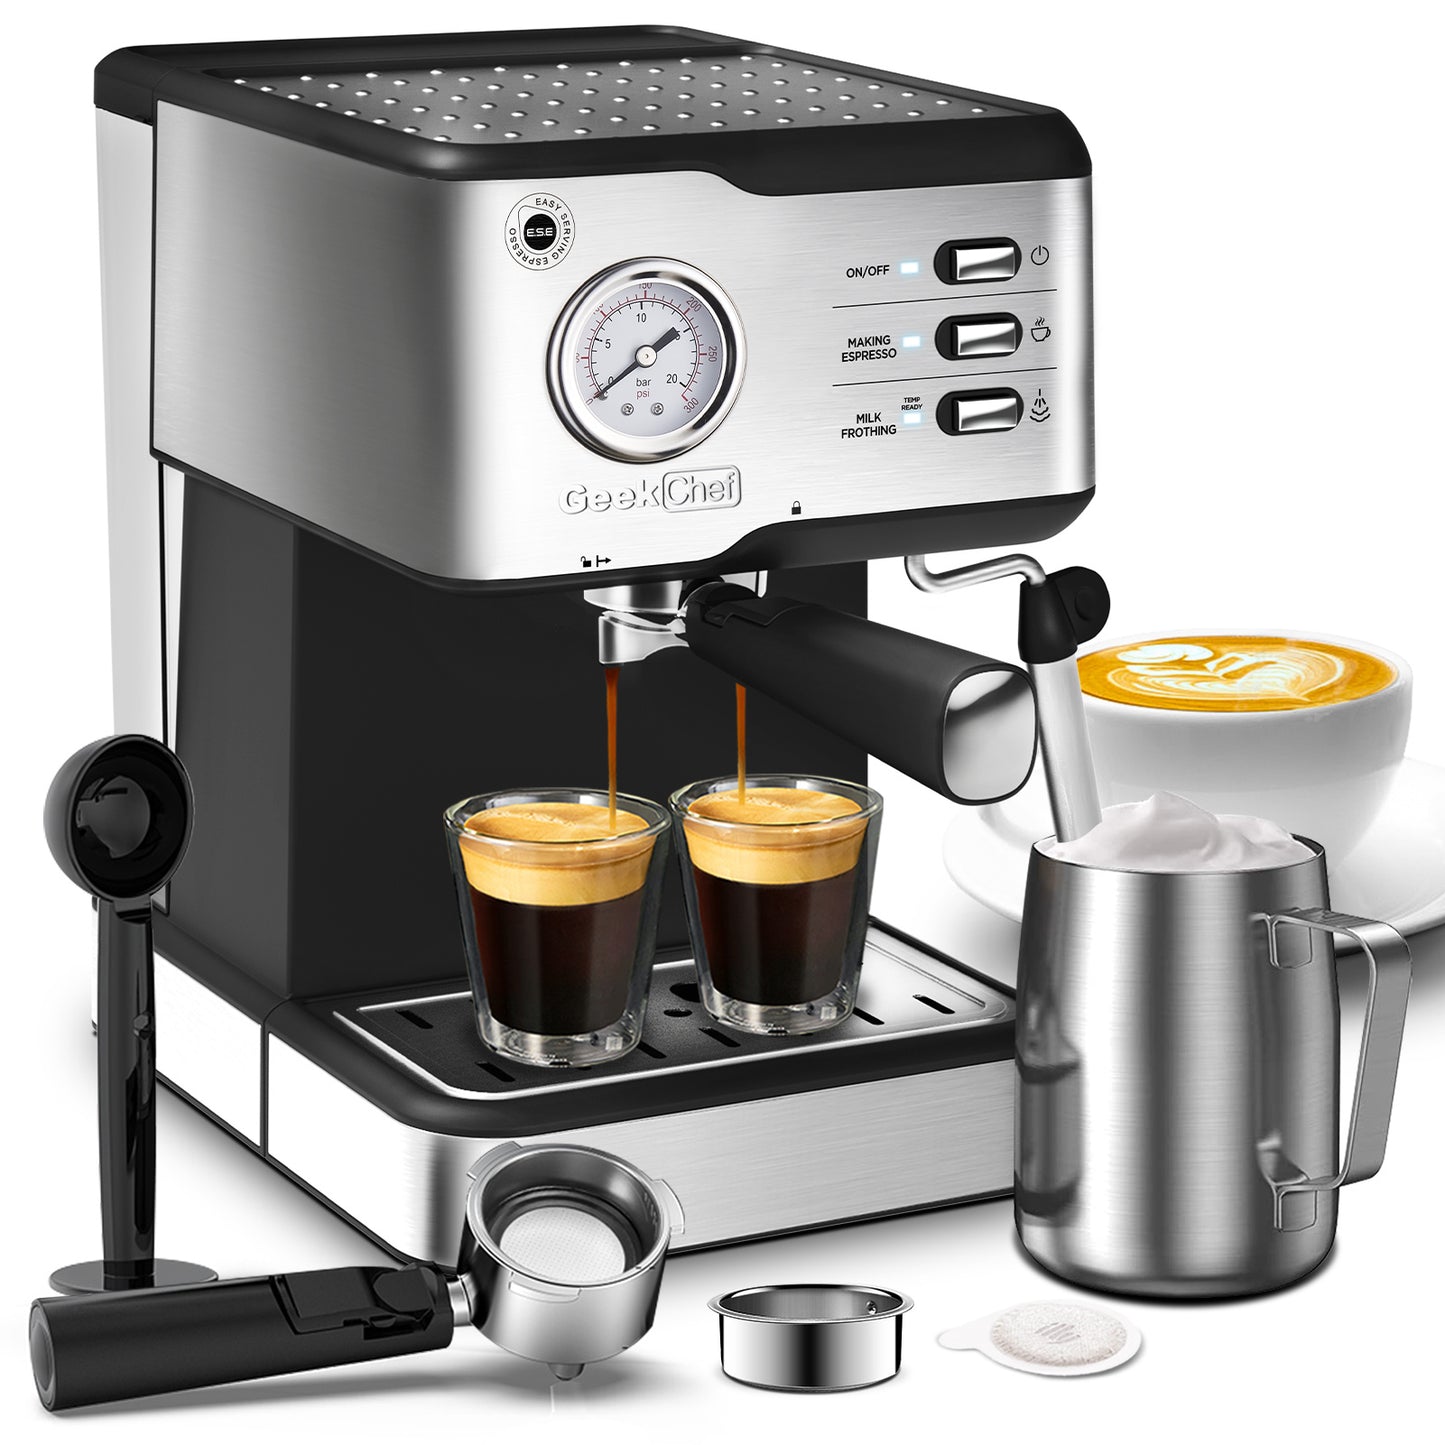 Geek Chef Espresso Machine;  Espresso and Cappuccino latte Maker 20 Bar Pump Coffee Machine Compatible with ESE POD filter&Milk Frother Steam Wand;  for Home Barista;  950W;  1.5L Water Tank